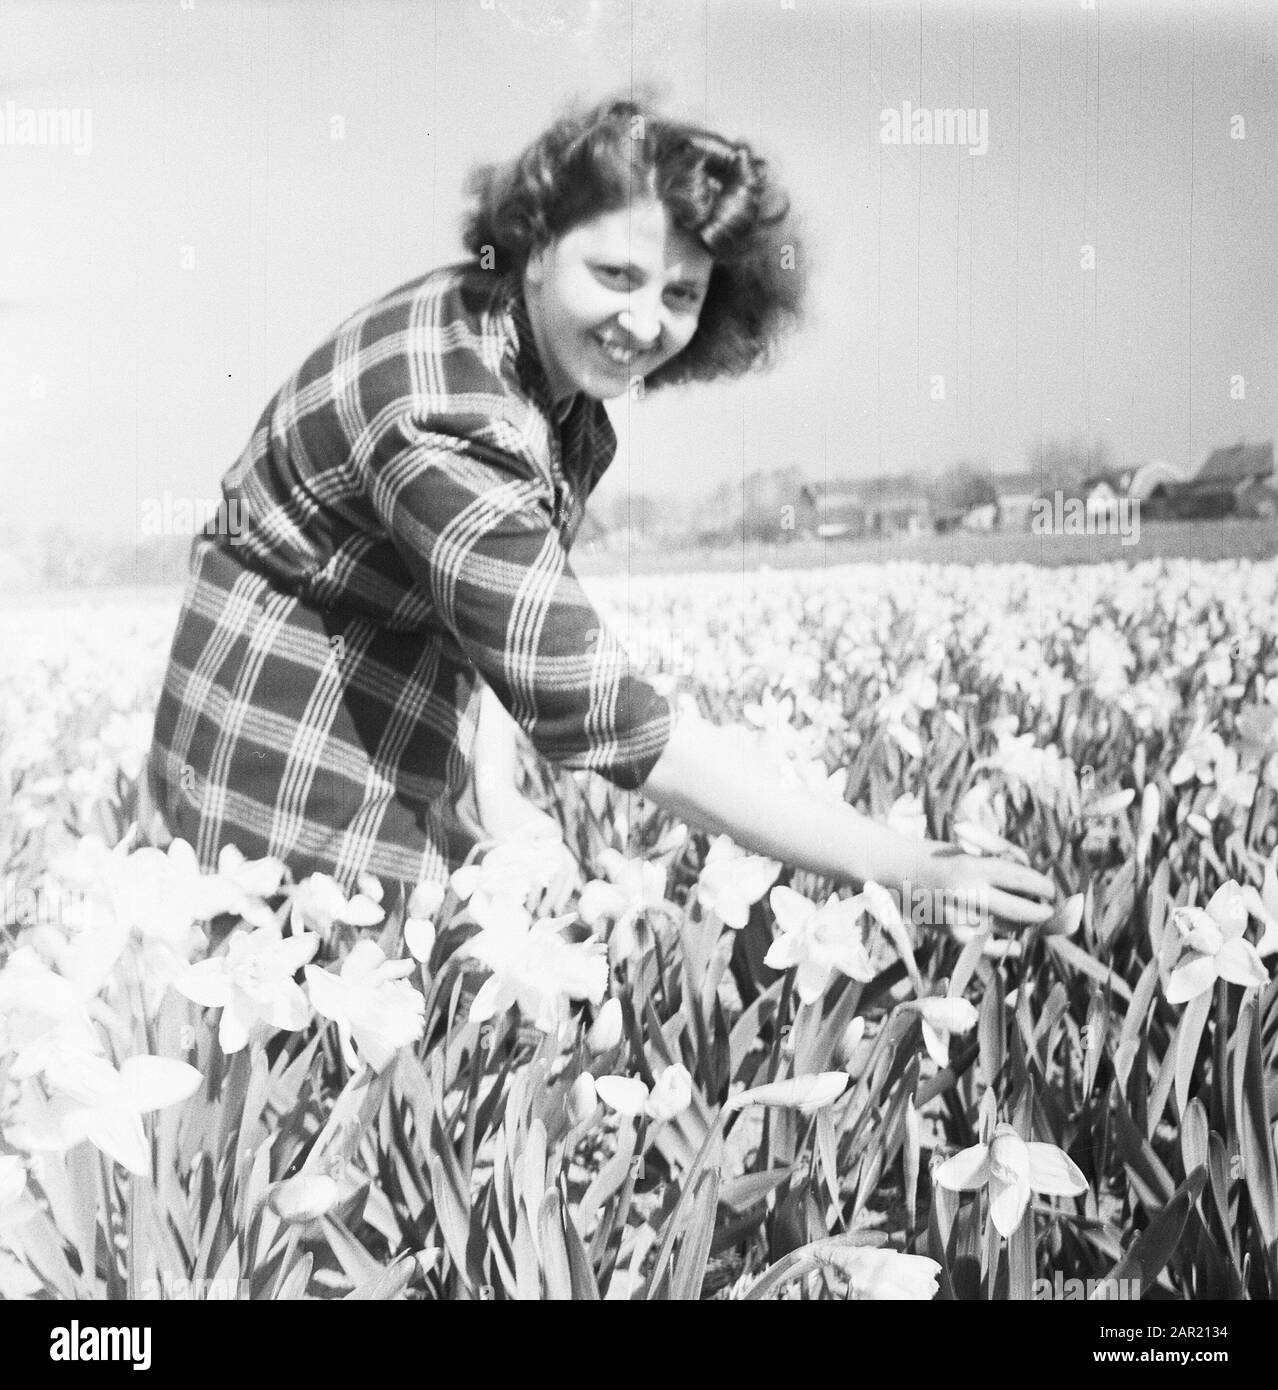 Lisse. The first daffodil field Date: March 26, 1953 Location: Lisse Keywords: flowers, fields Person name: Daffodils Stock Photo